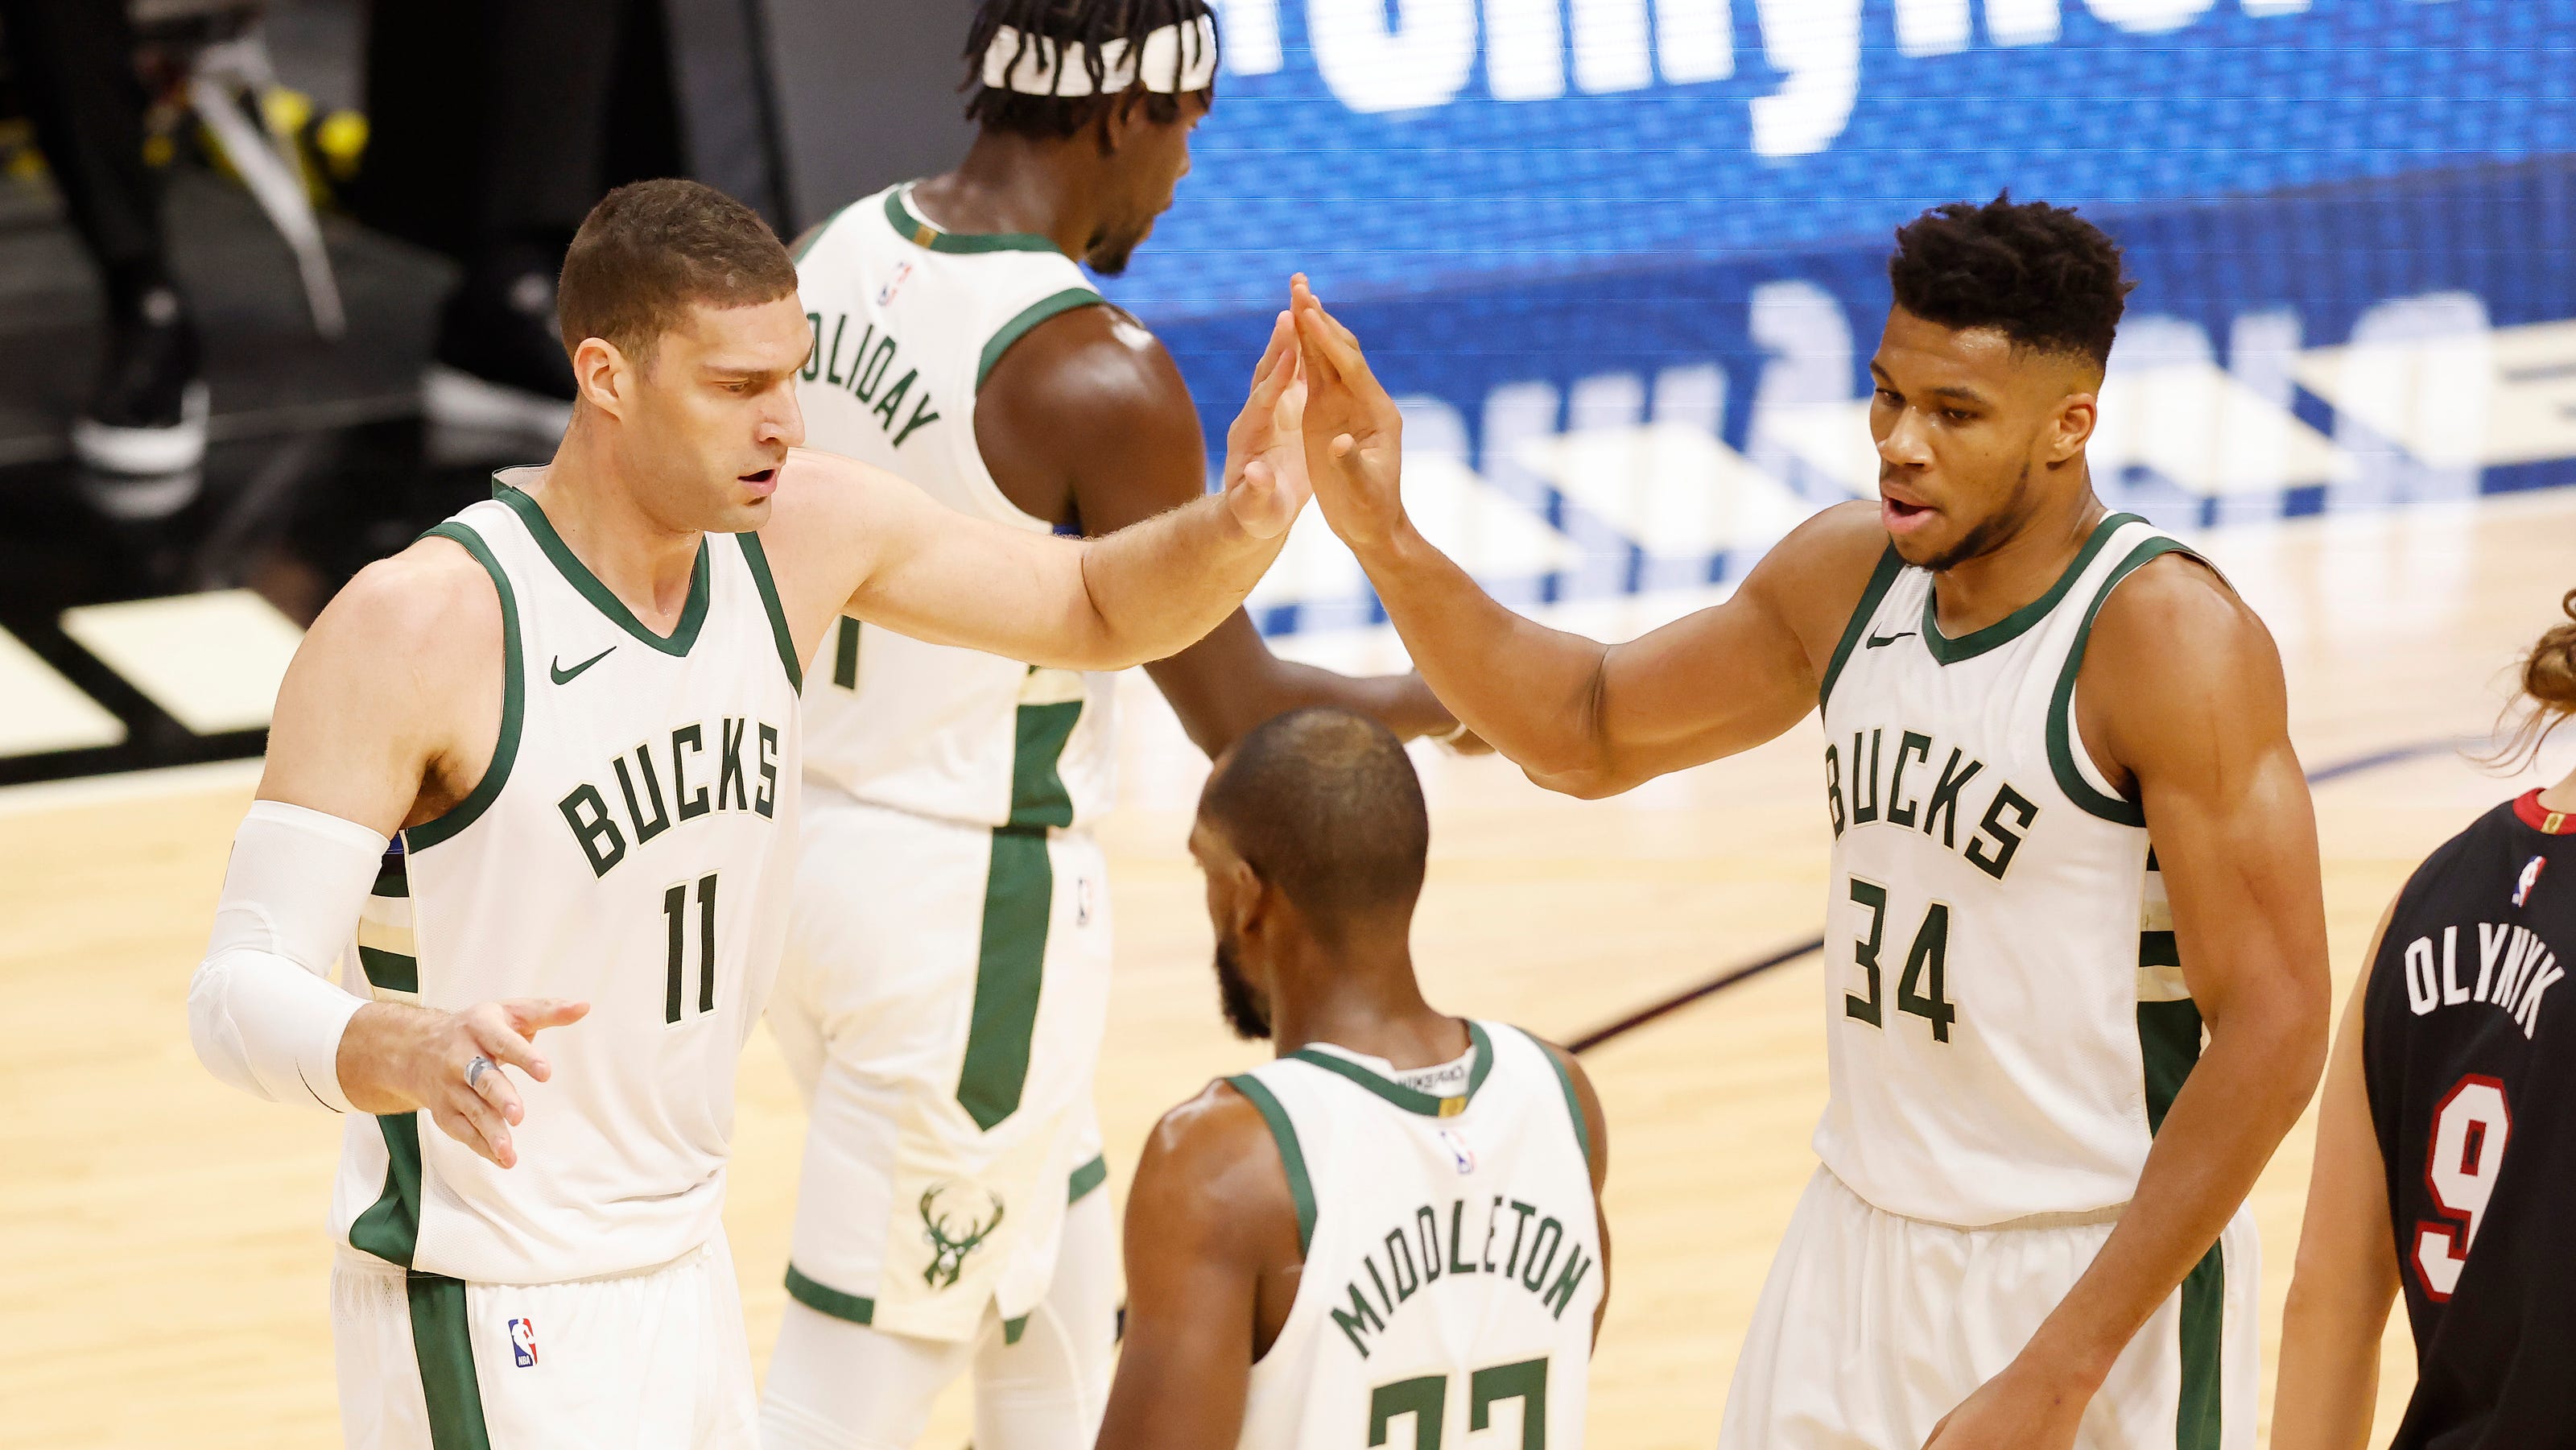 Bucks set NBA record with 29 3pointers in rout of Heat